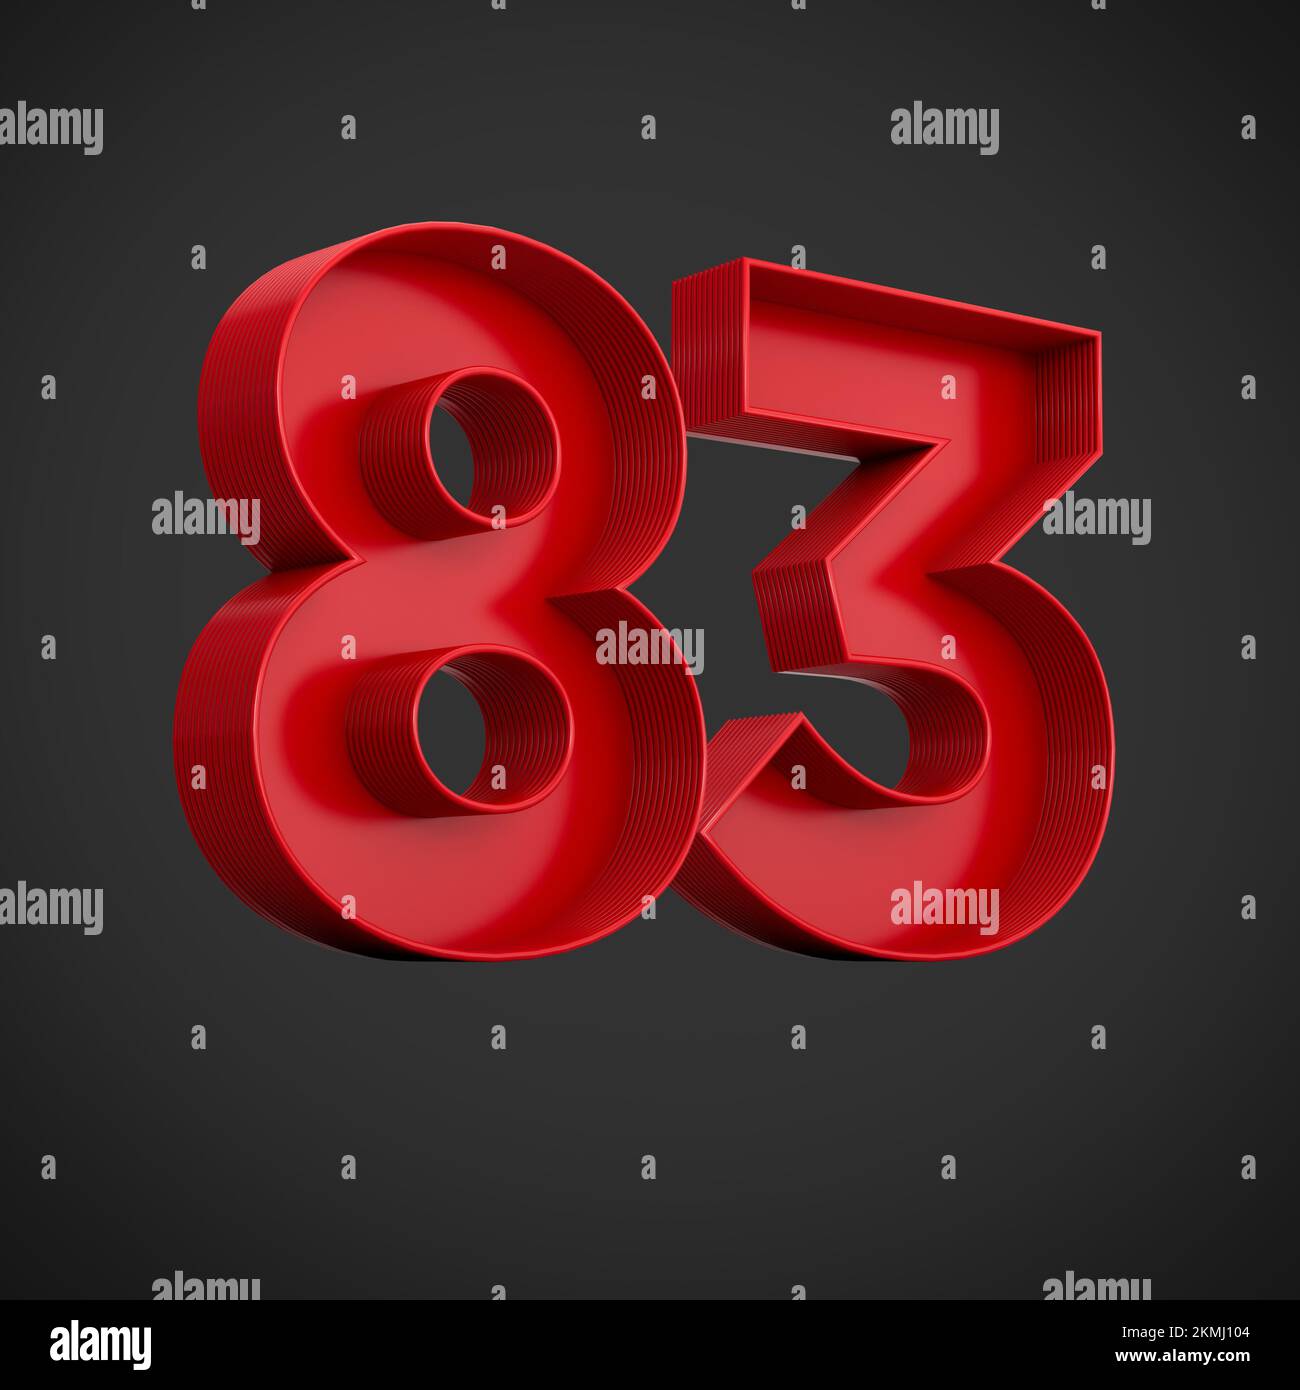 A 3d rendering of the number eighty-three in red over the black background - 83 icon Stock Photo